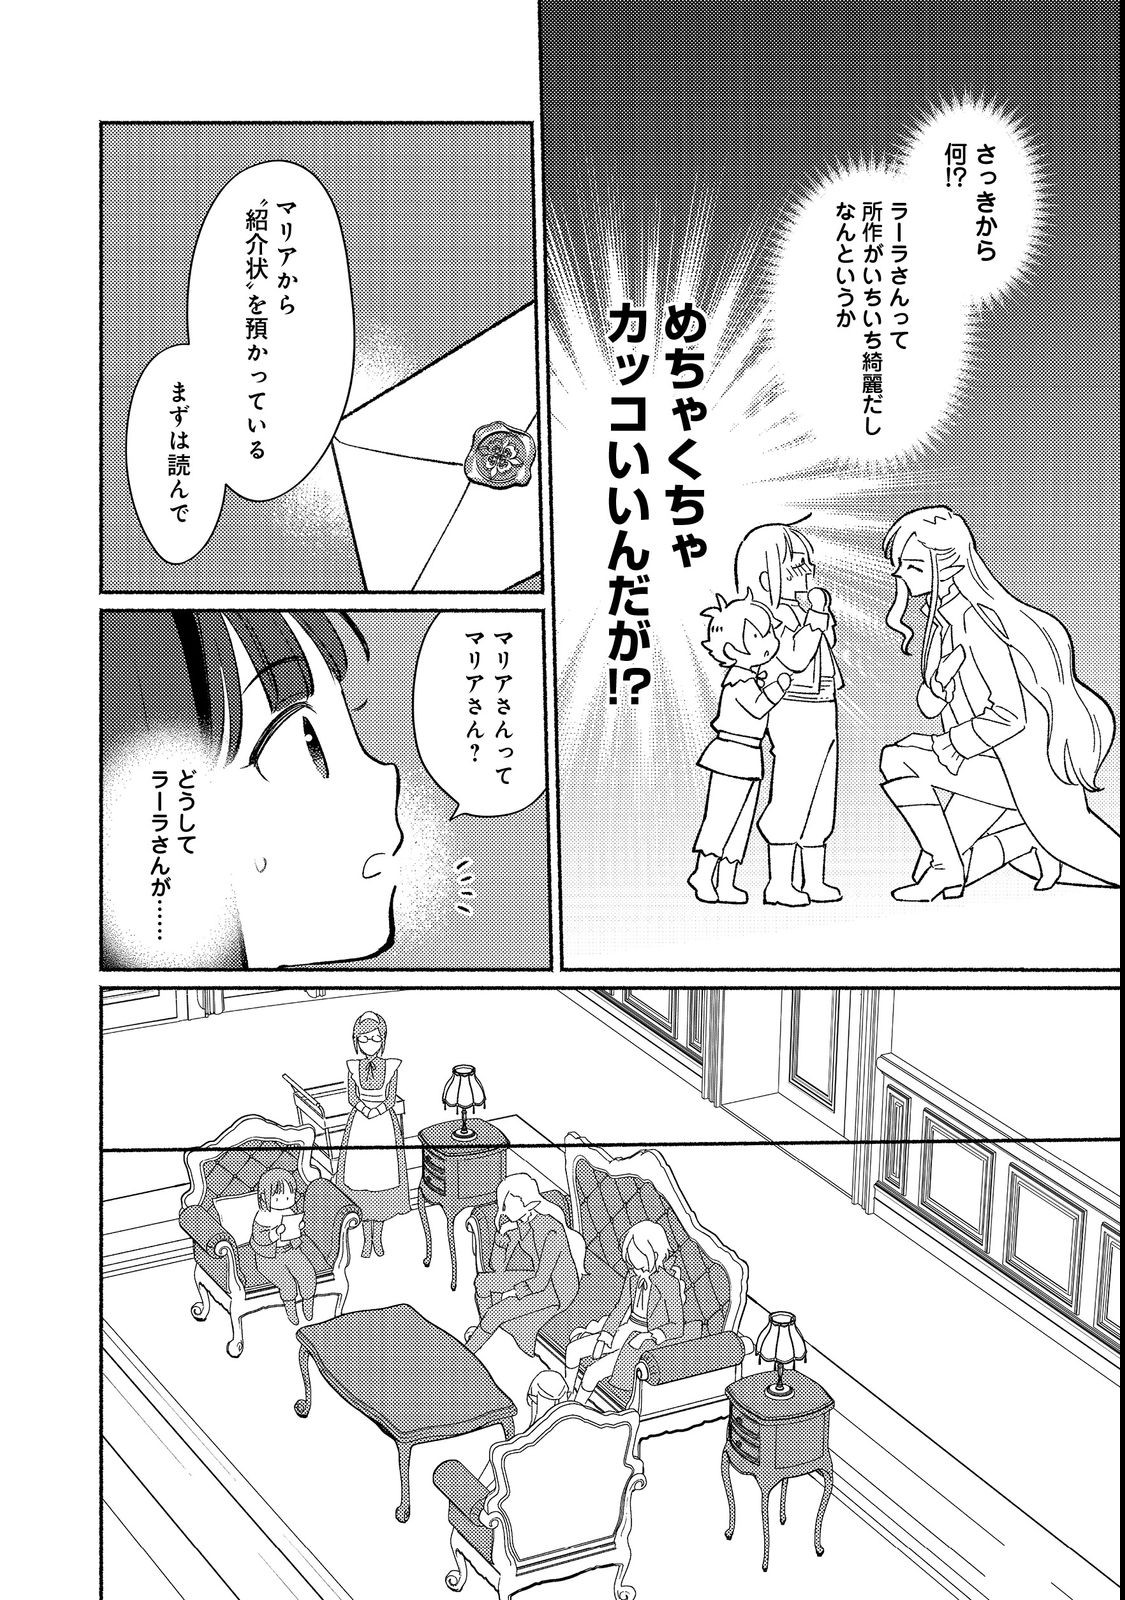 I’m the White Pig Nobleman 第17.1話 - Page 10